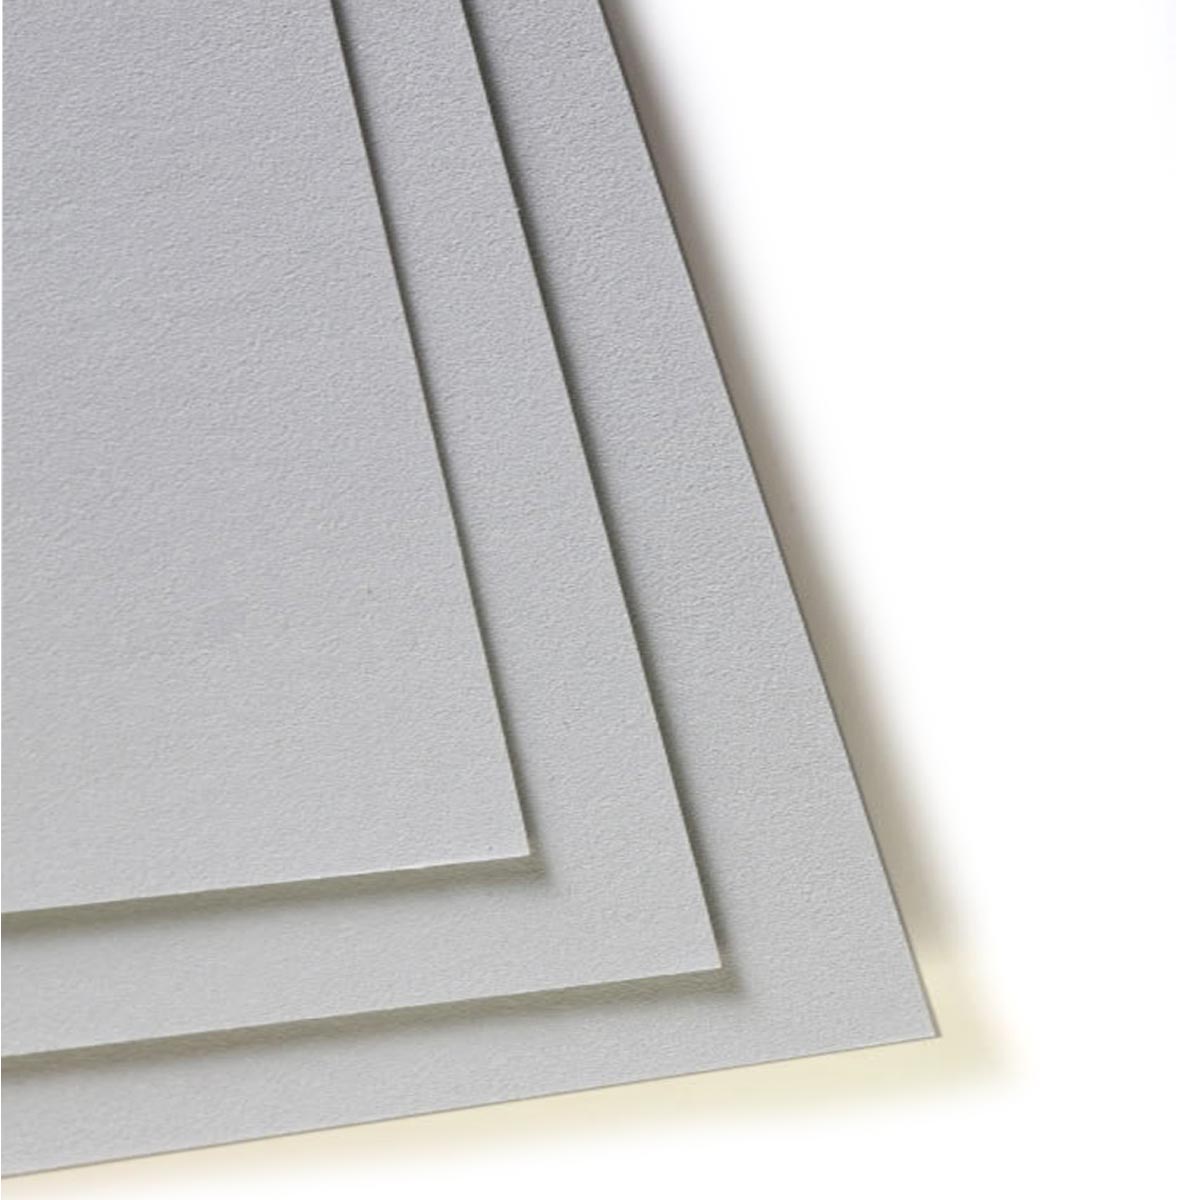 Clairefontaine Pastelmat Mounted Board - Light Blue 19.5 x 27.5 in (50x70cm)